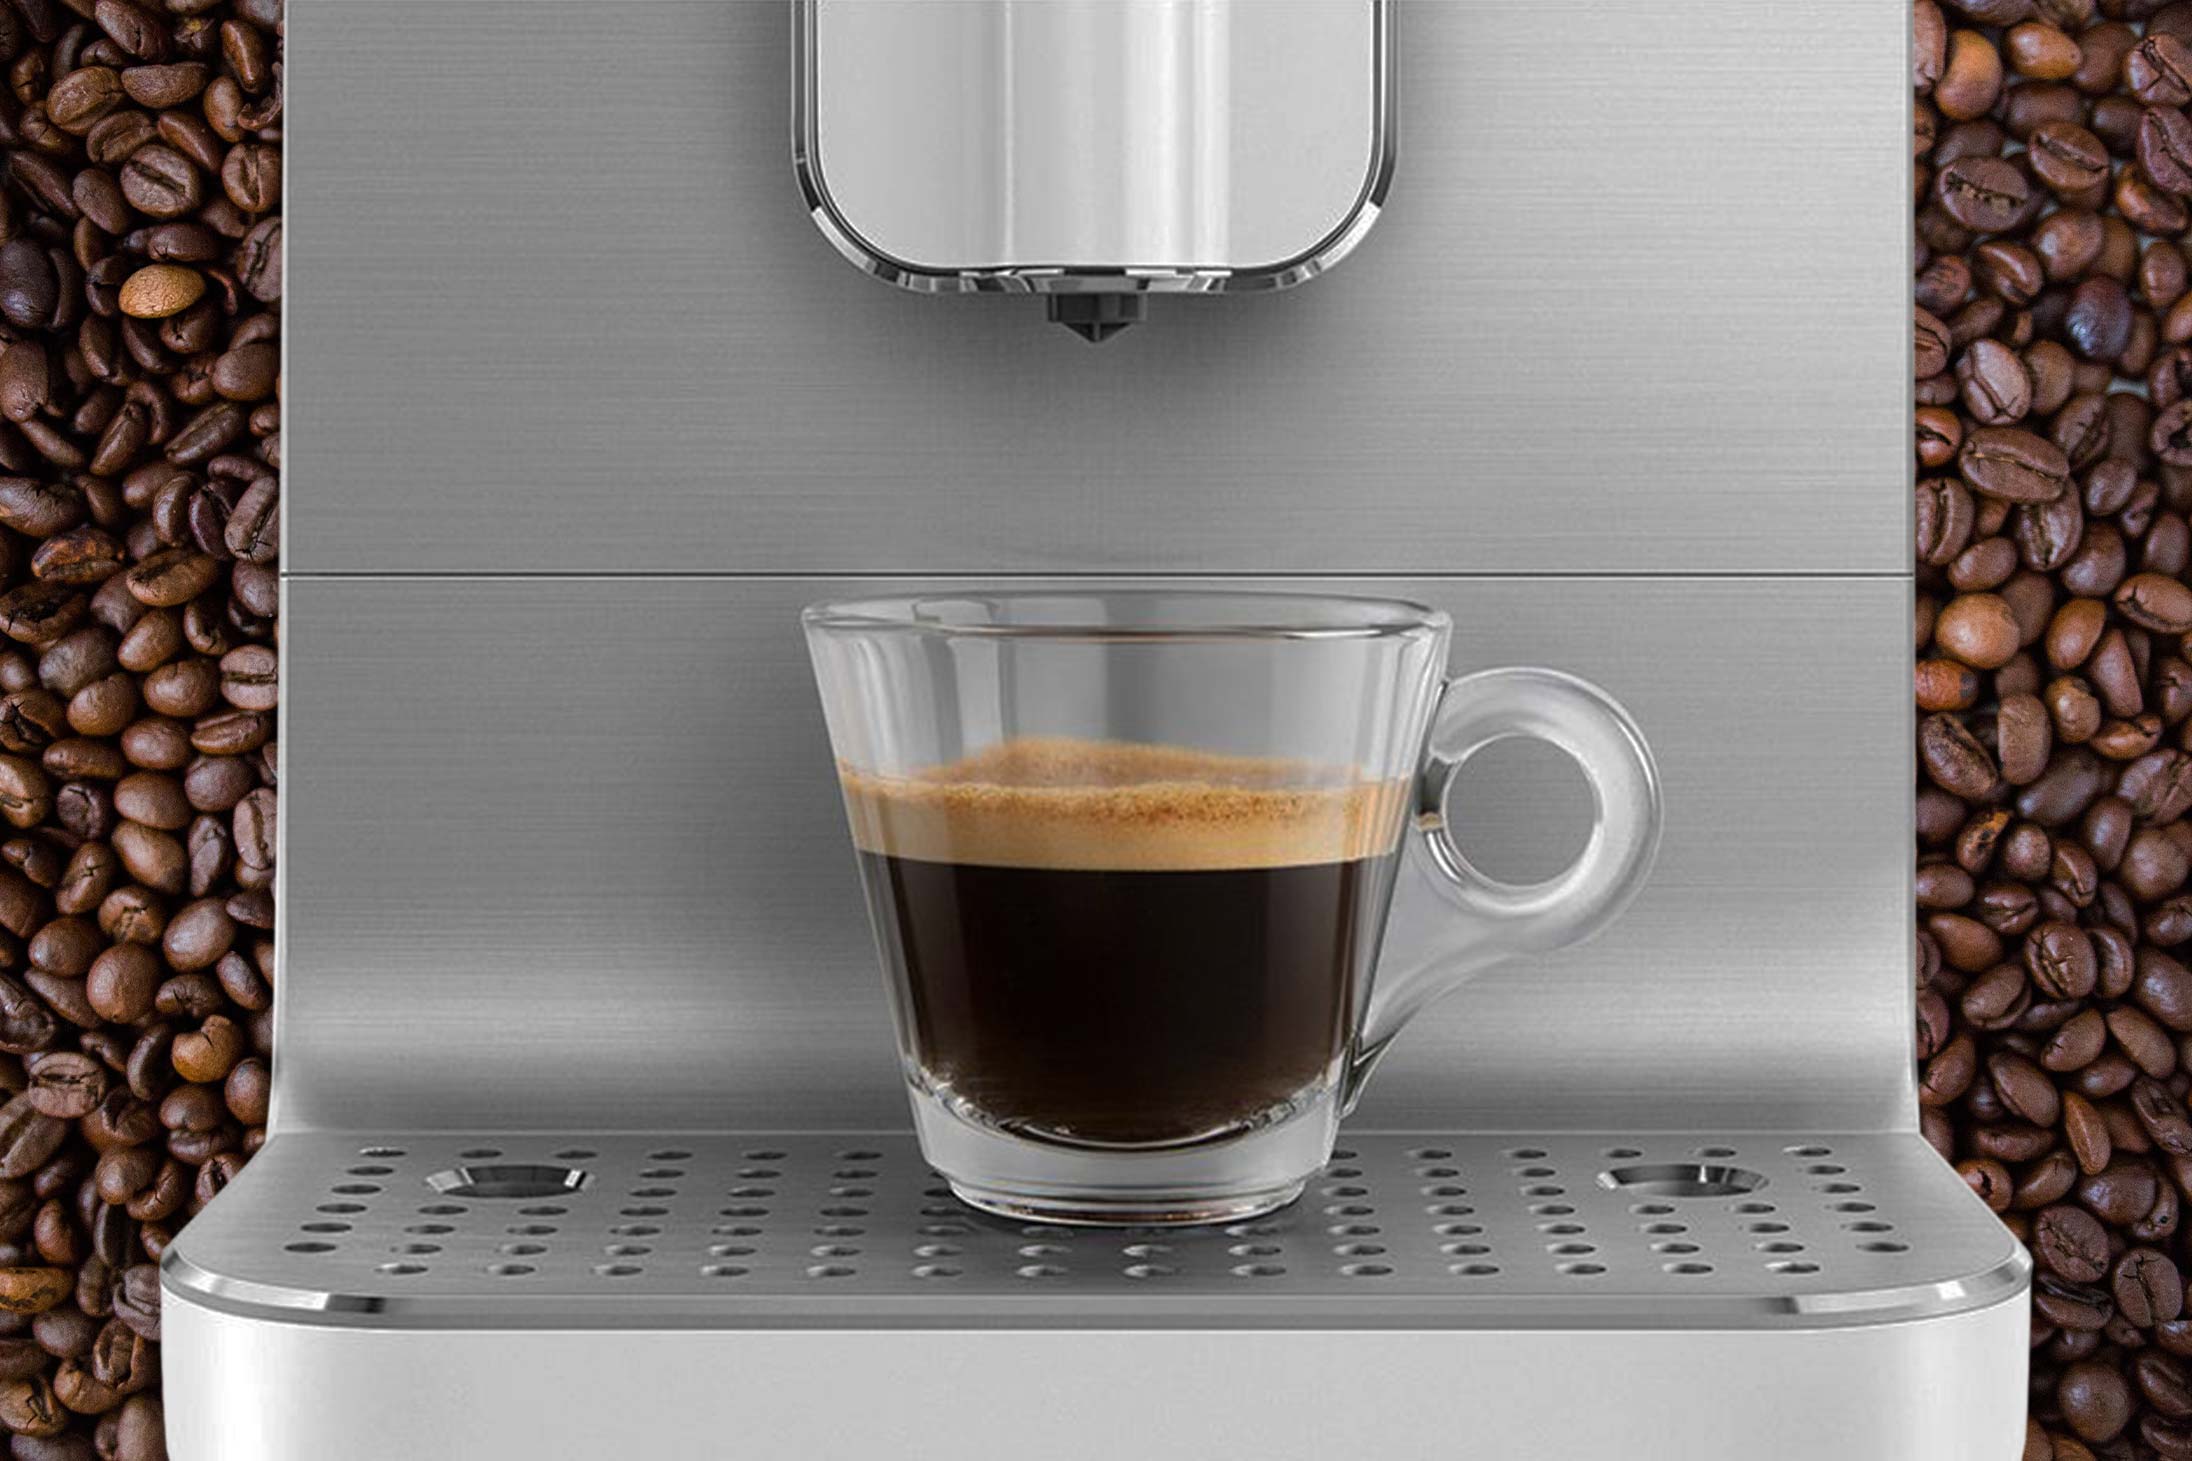 A Smeg coffee machine available at Pacific Place